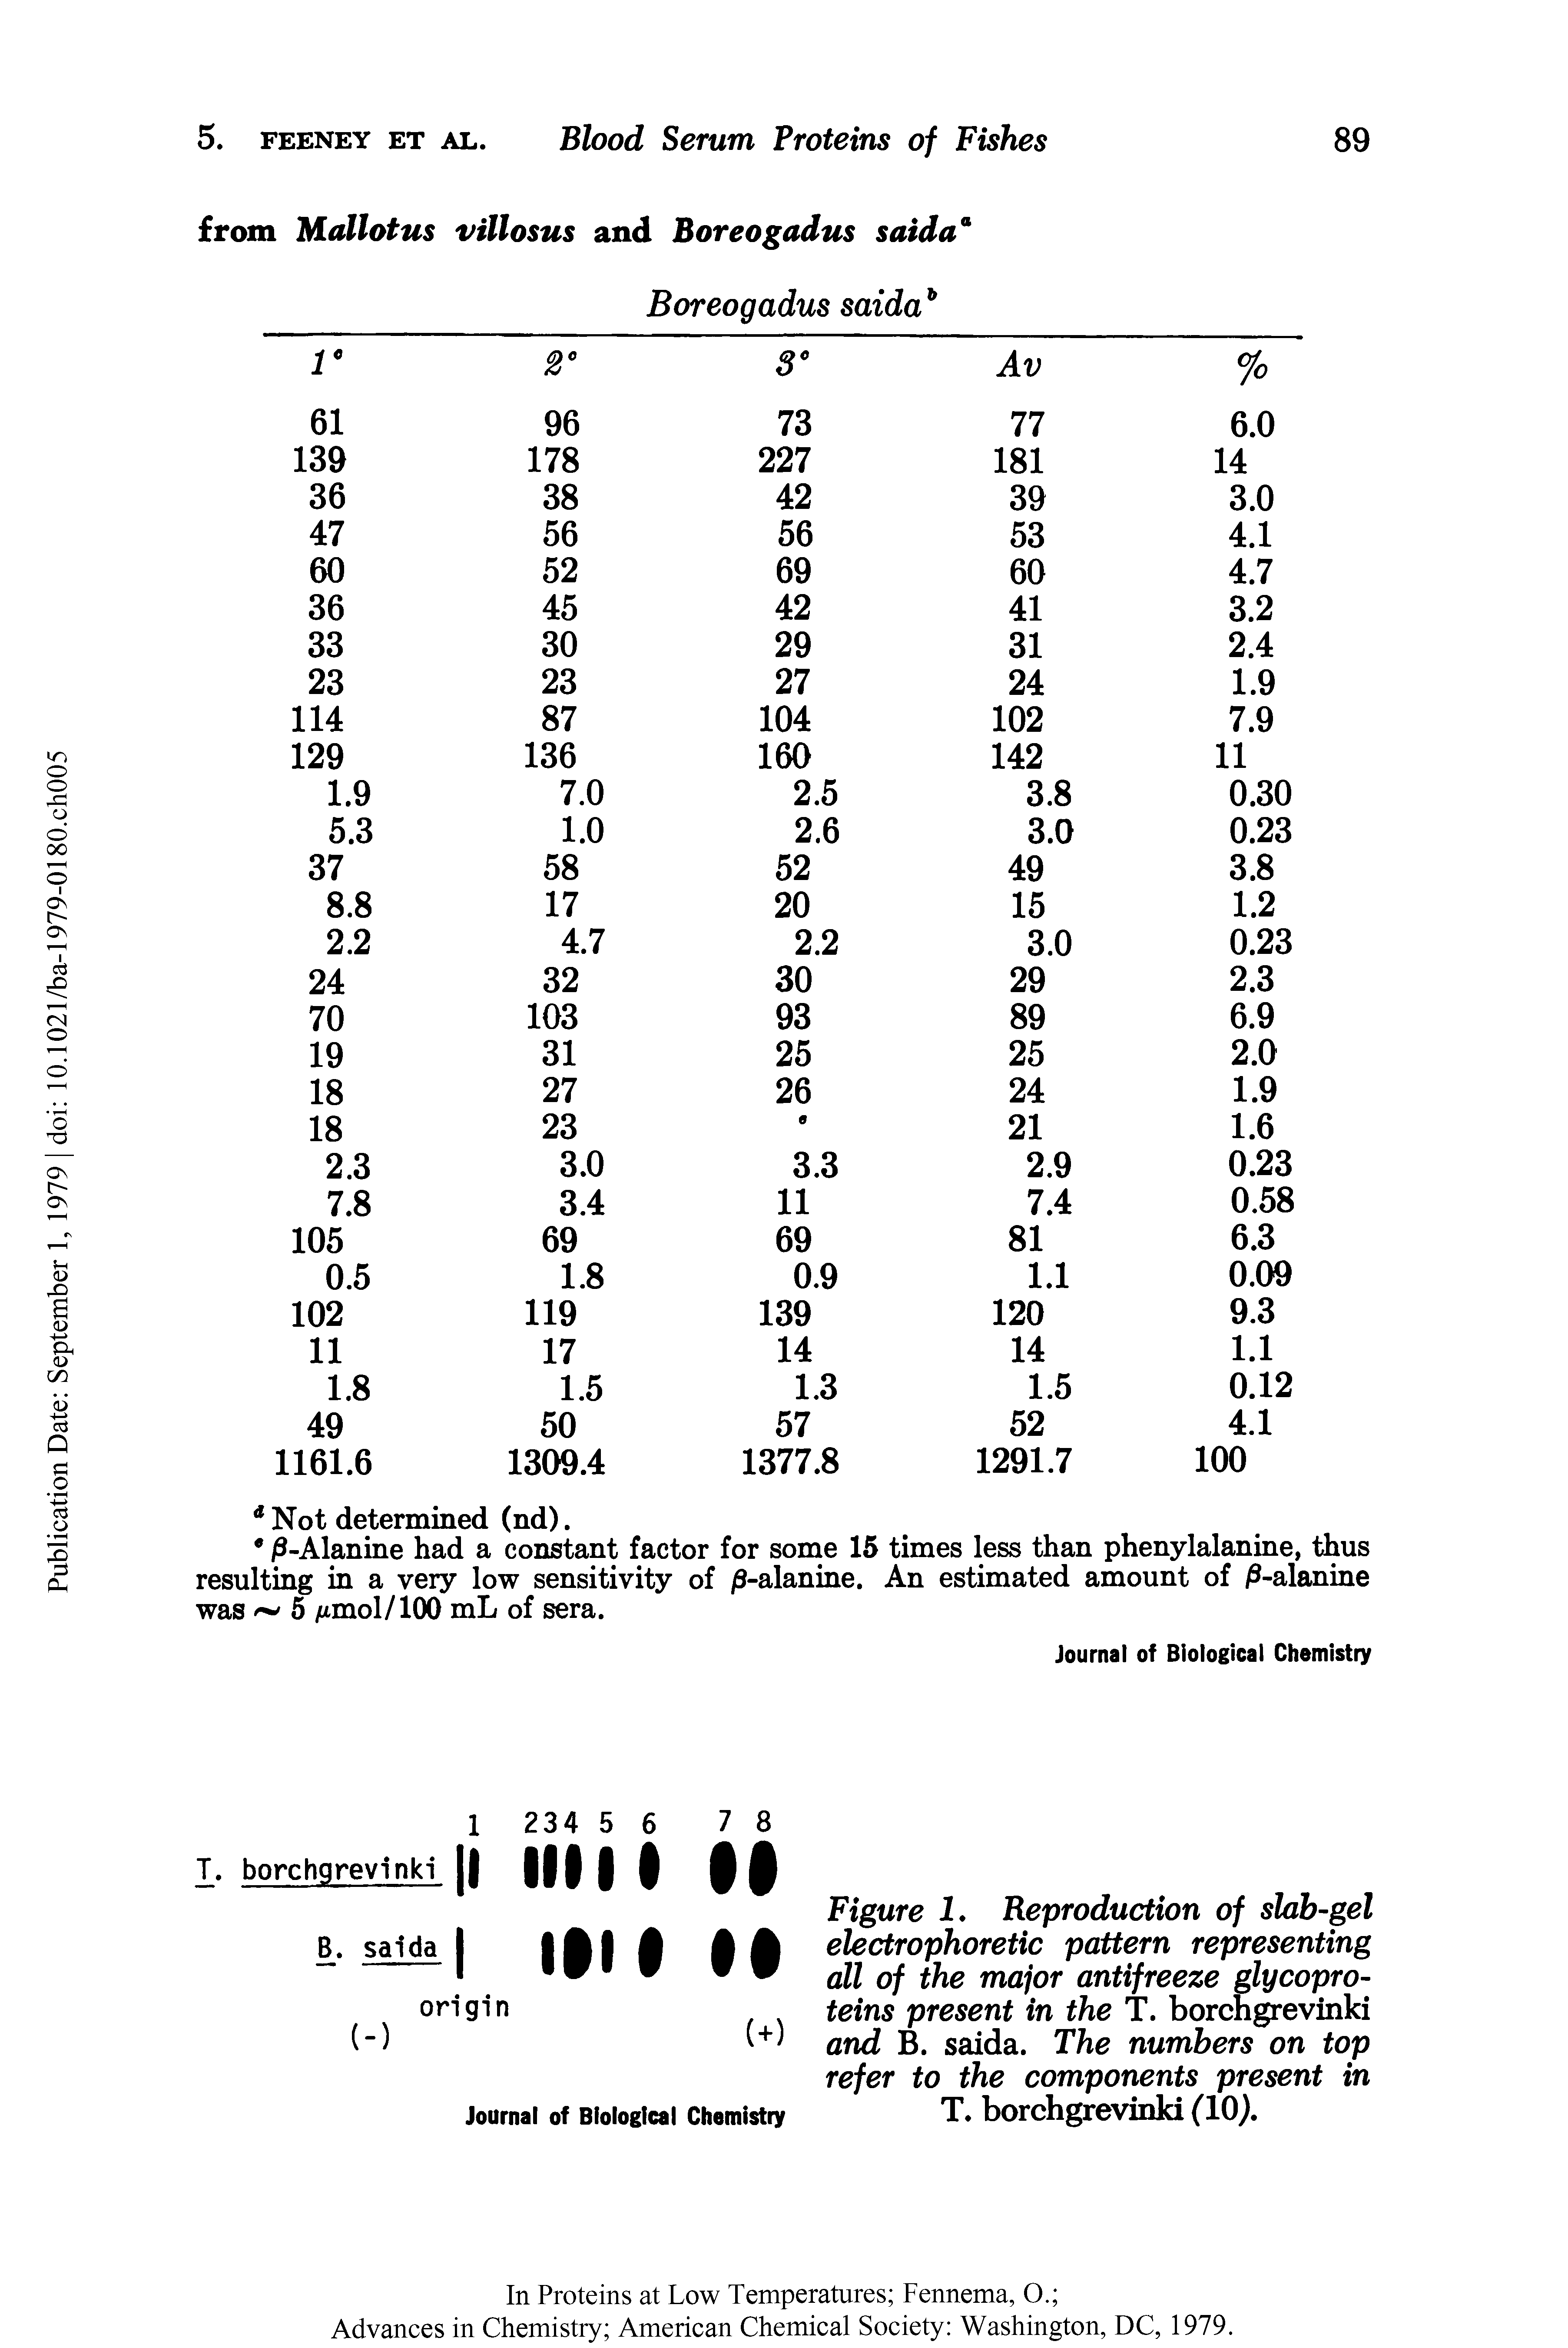 Figure I. Reproduction of slab-gel electrophoretic pattern representing all of the major antifreeze glycoproteins present in the T. borchgrevinki and B. saida. The numbers on top refer to the components present in T. borchgrevinki (10).